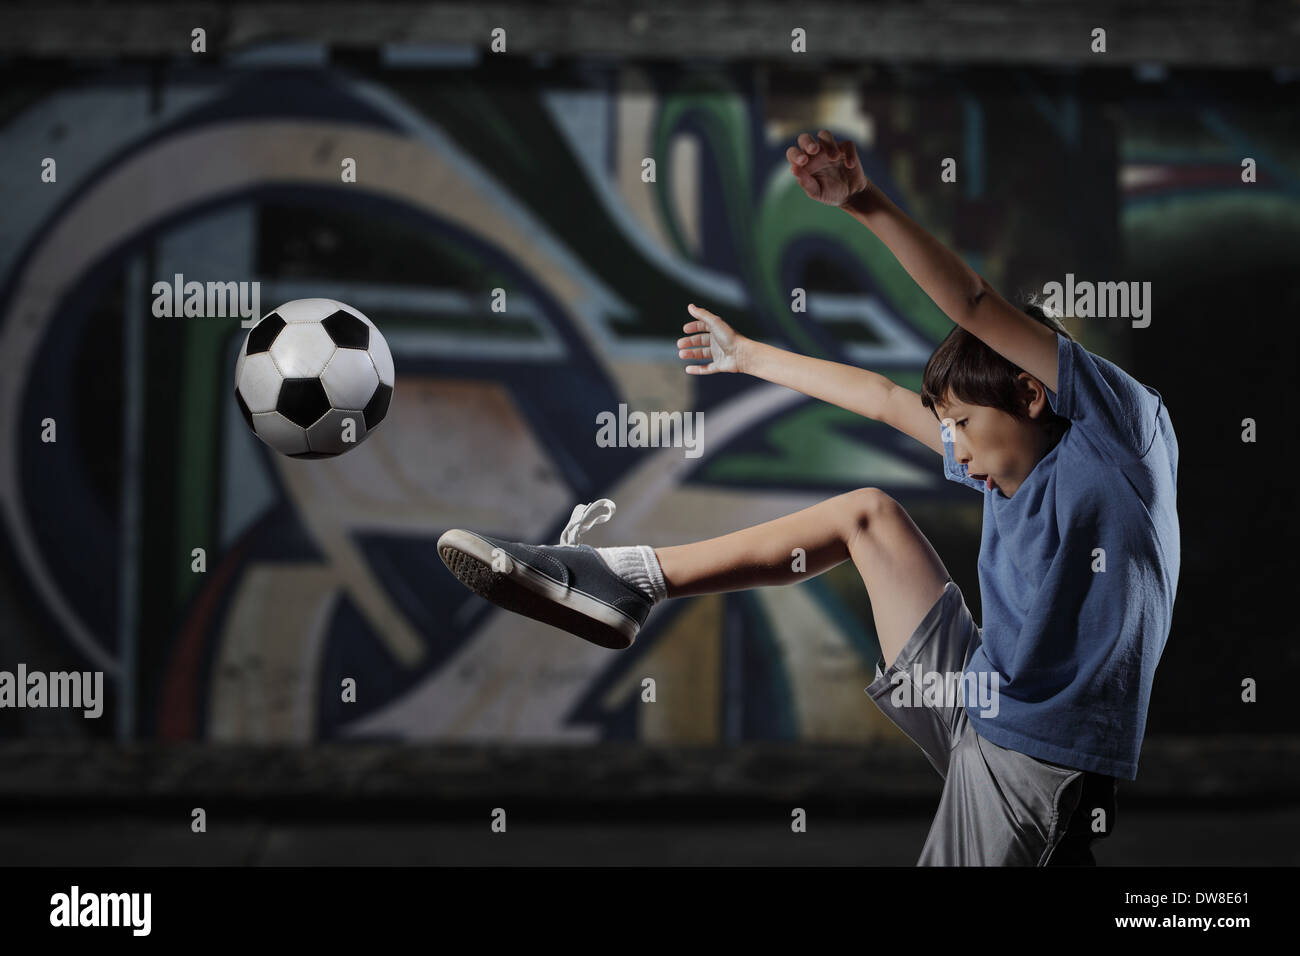 A young boy plays street soccer against a graffiti covered wall - with dramatic lighting and subdued colors Stock Photo